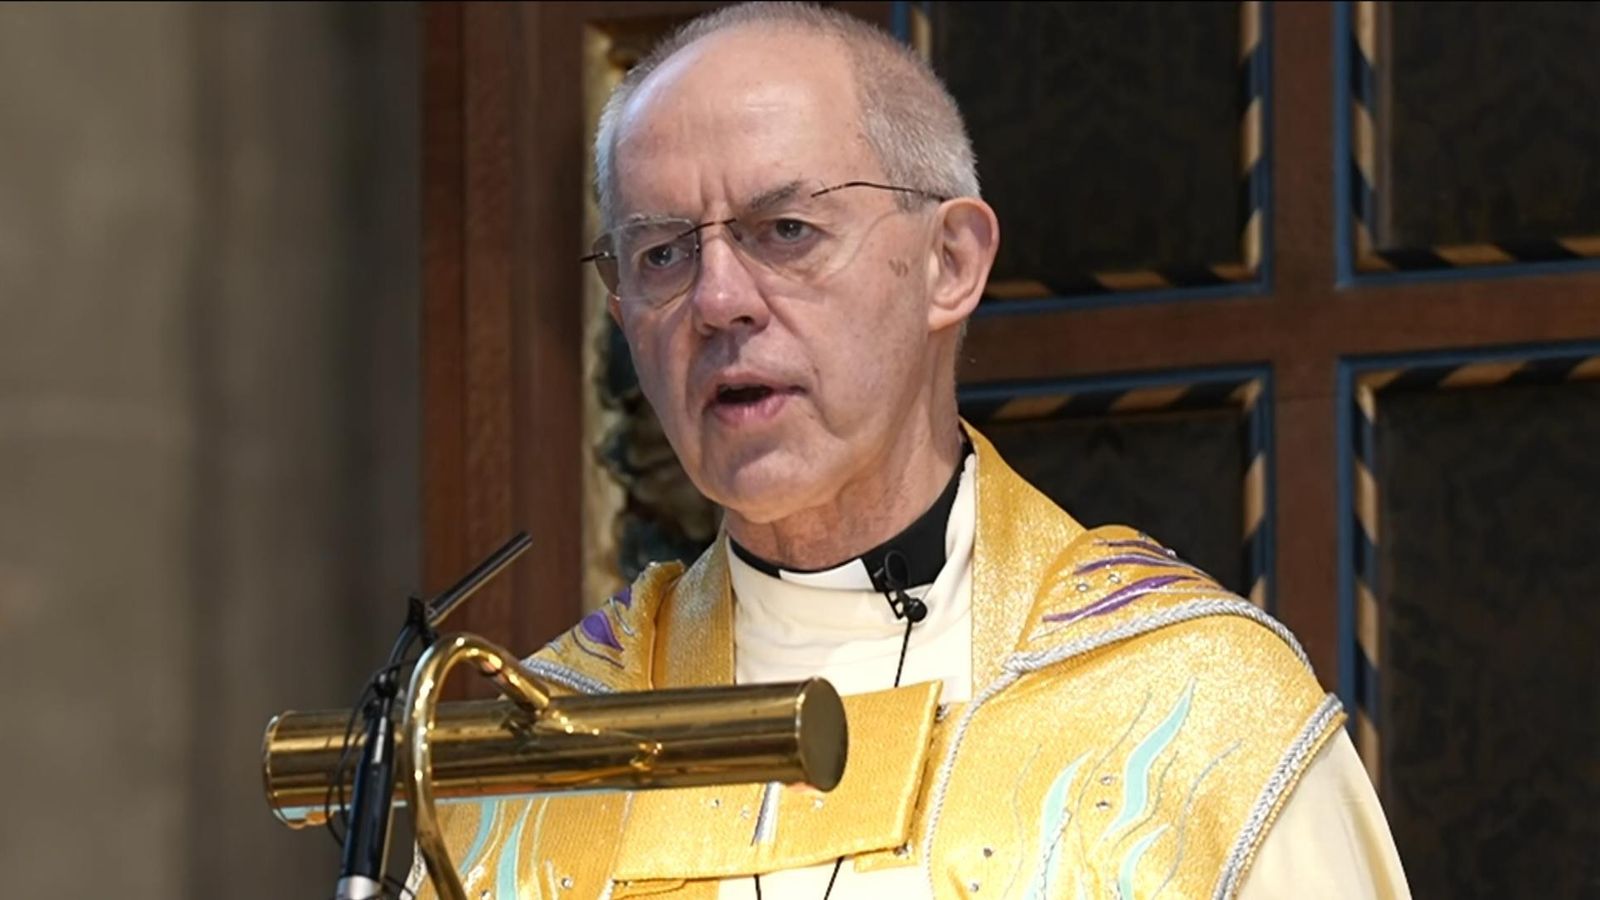 Justin Welby: Archbishop says 'moral responsibility' to change housing crisis 'blighting lives